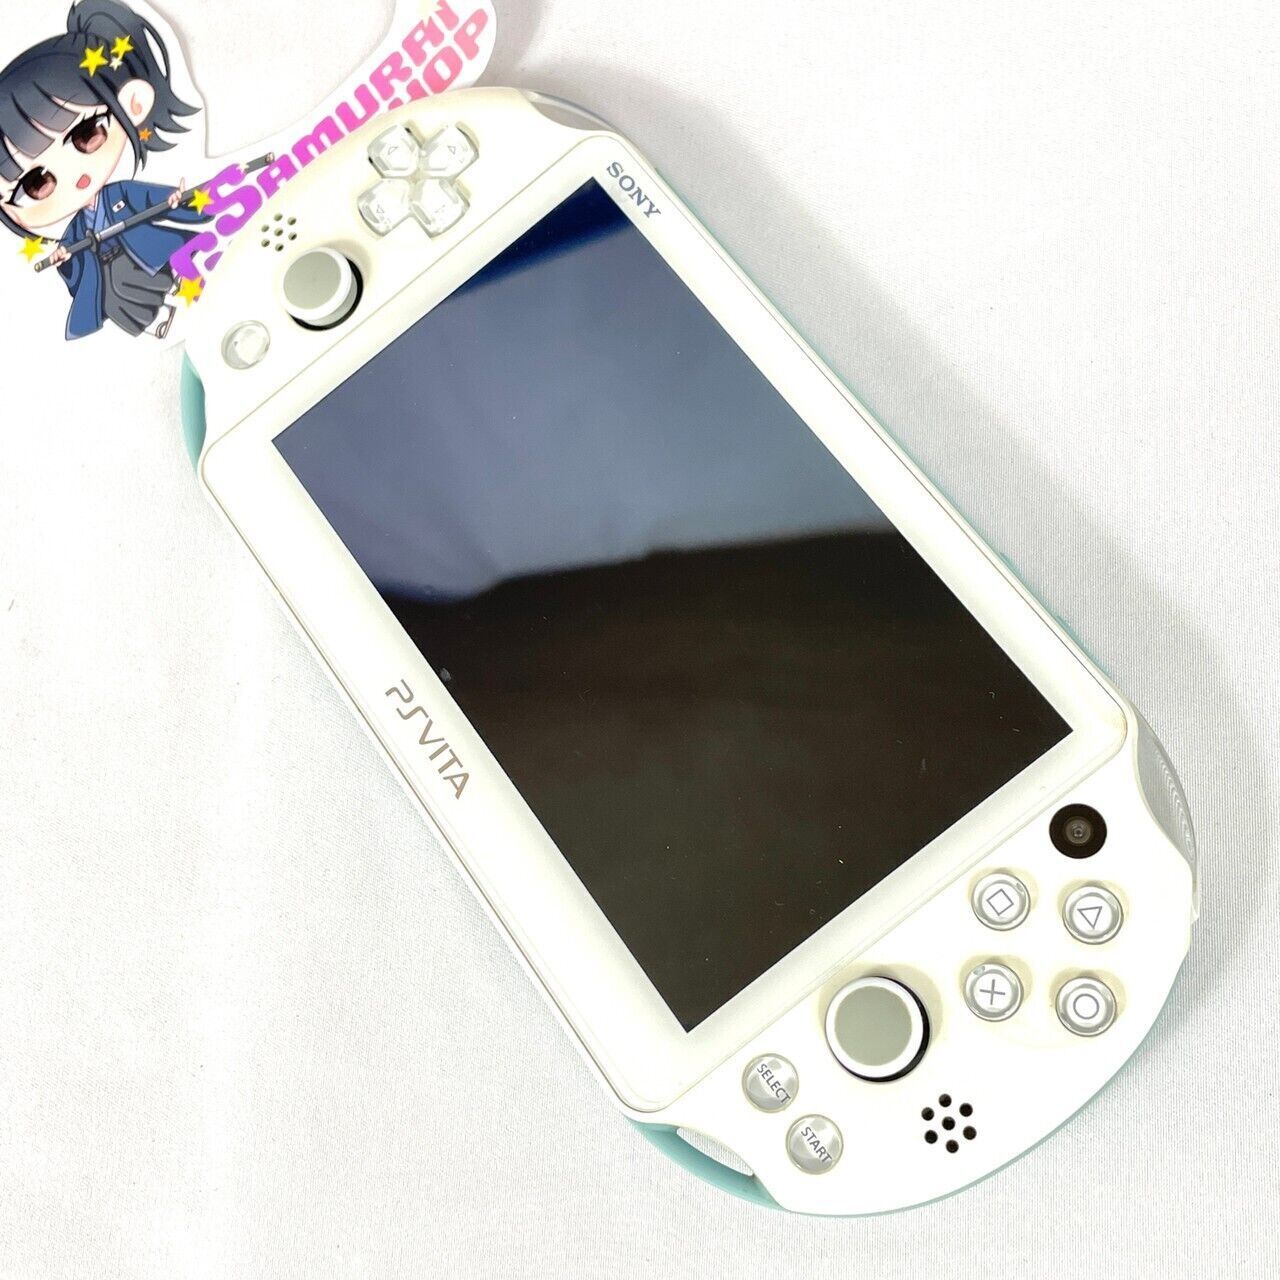 PS Vita PCH-2000 Sony Playstation Console Only and Choice USB Cable Japan Used